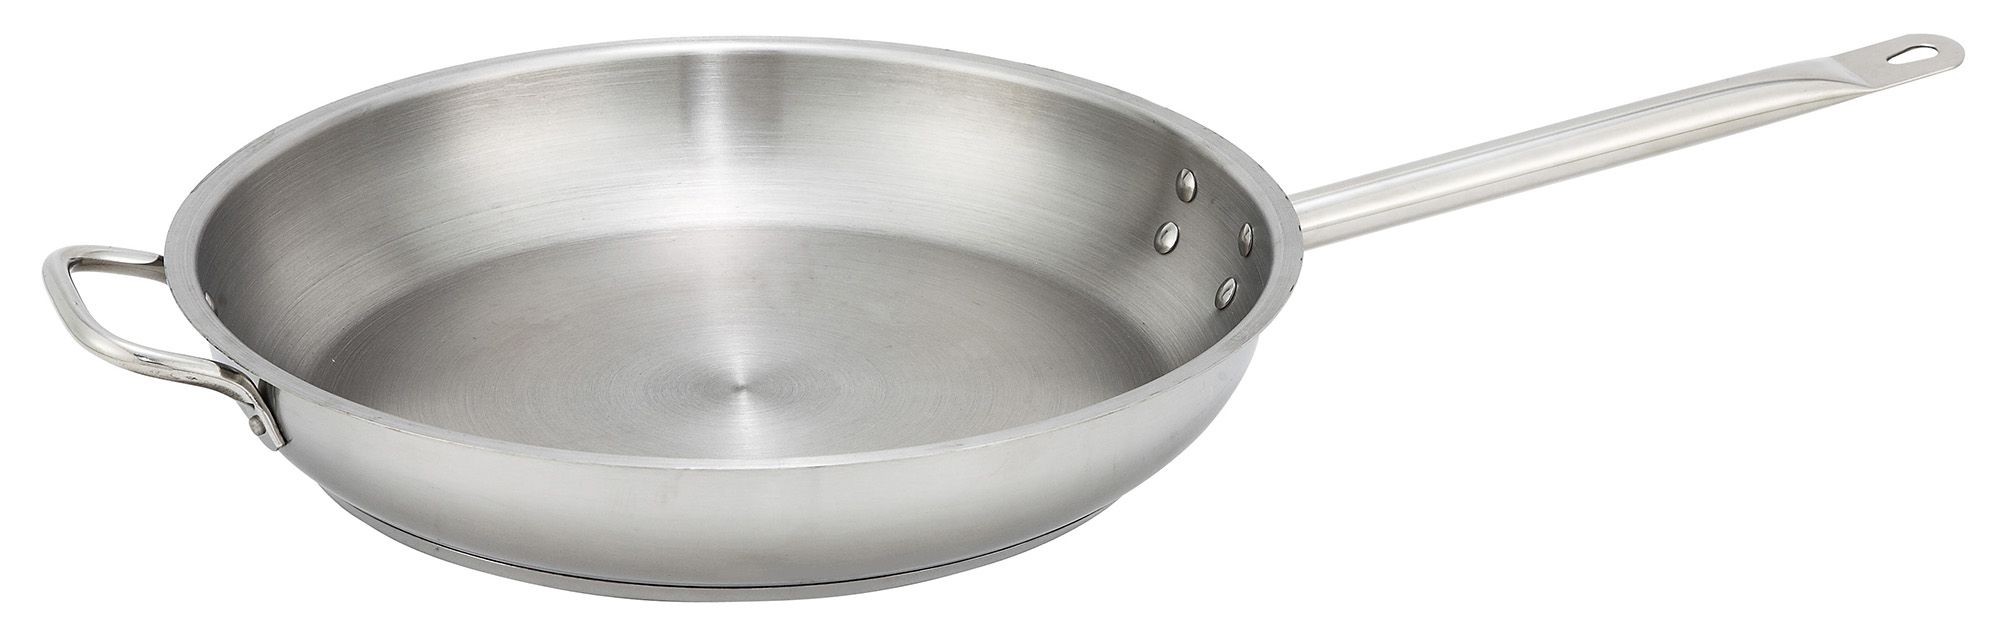 Winco SSFP-14 Stainless Steel Induction Fry Pan 14"